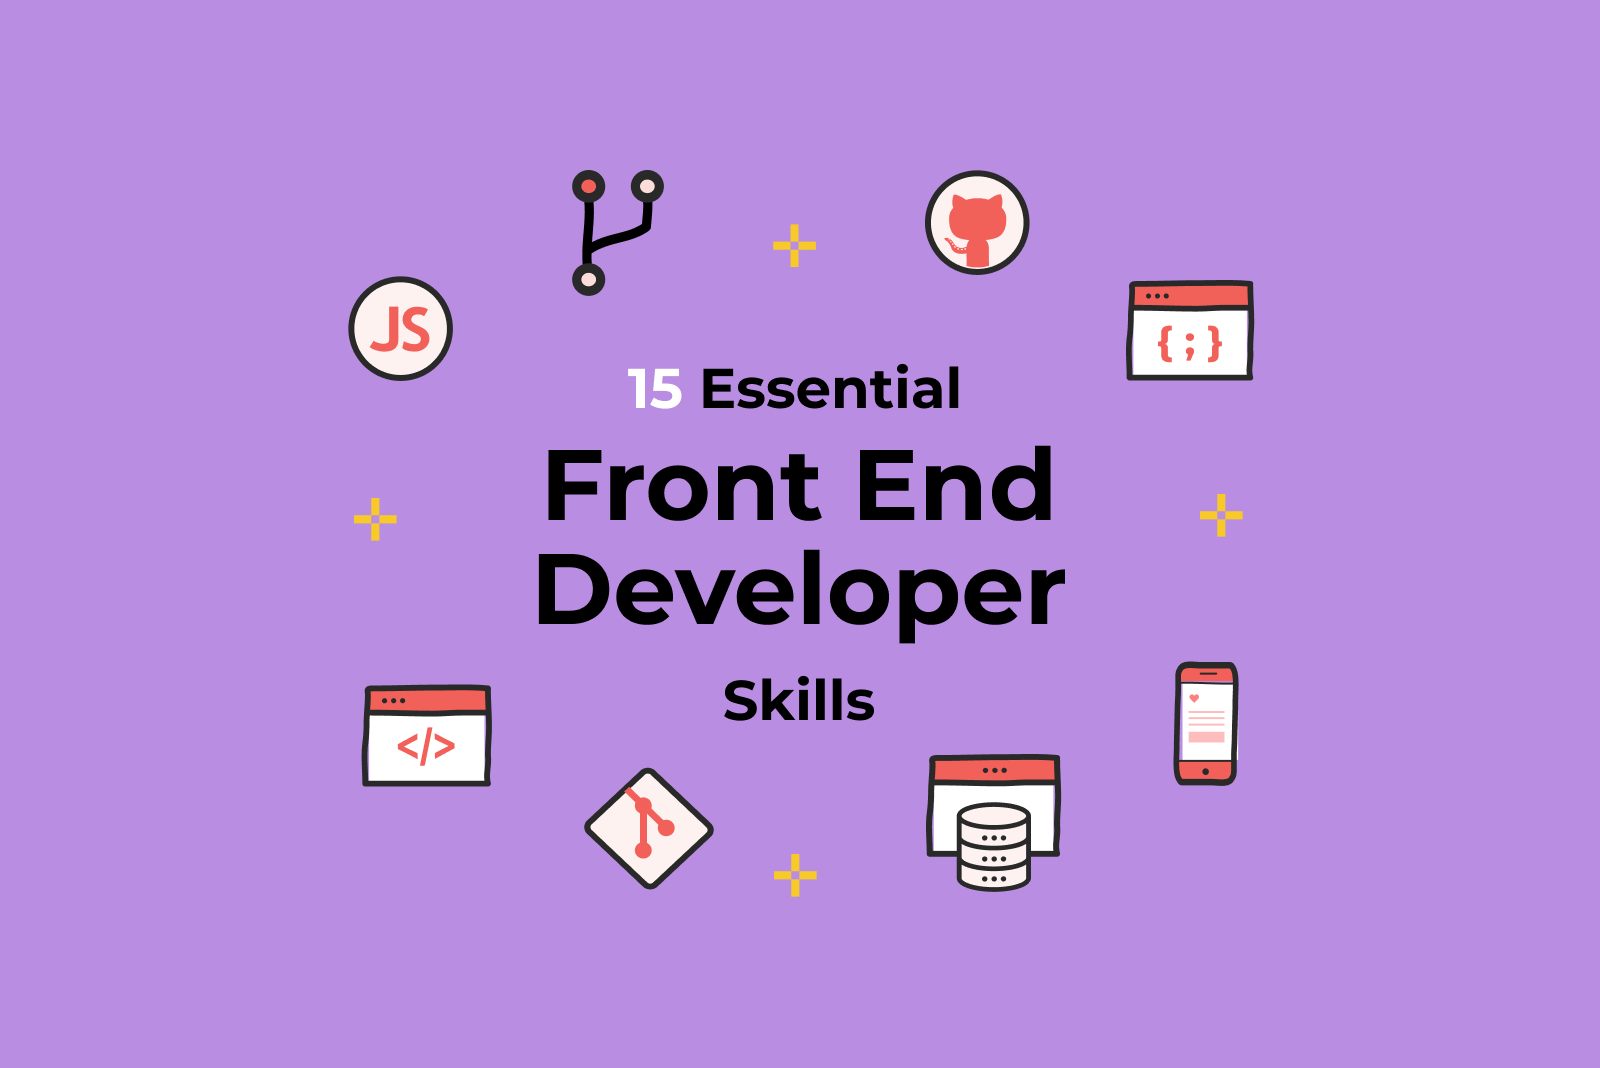 The most important technology for a frontend developer typically includes